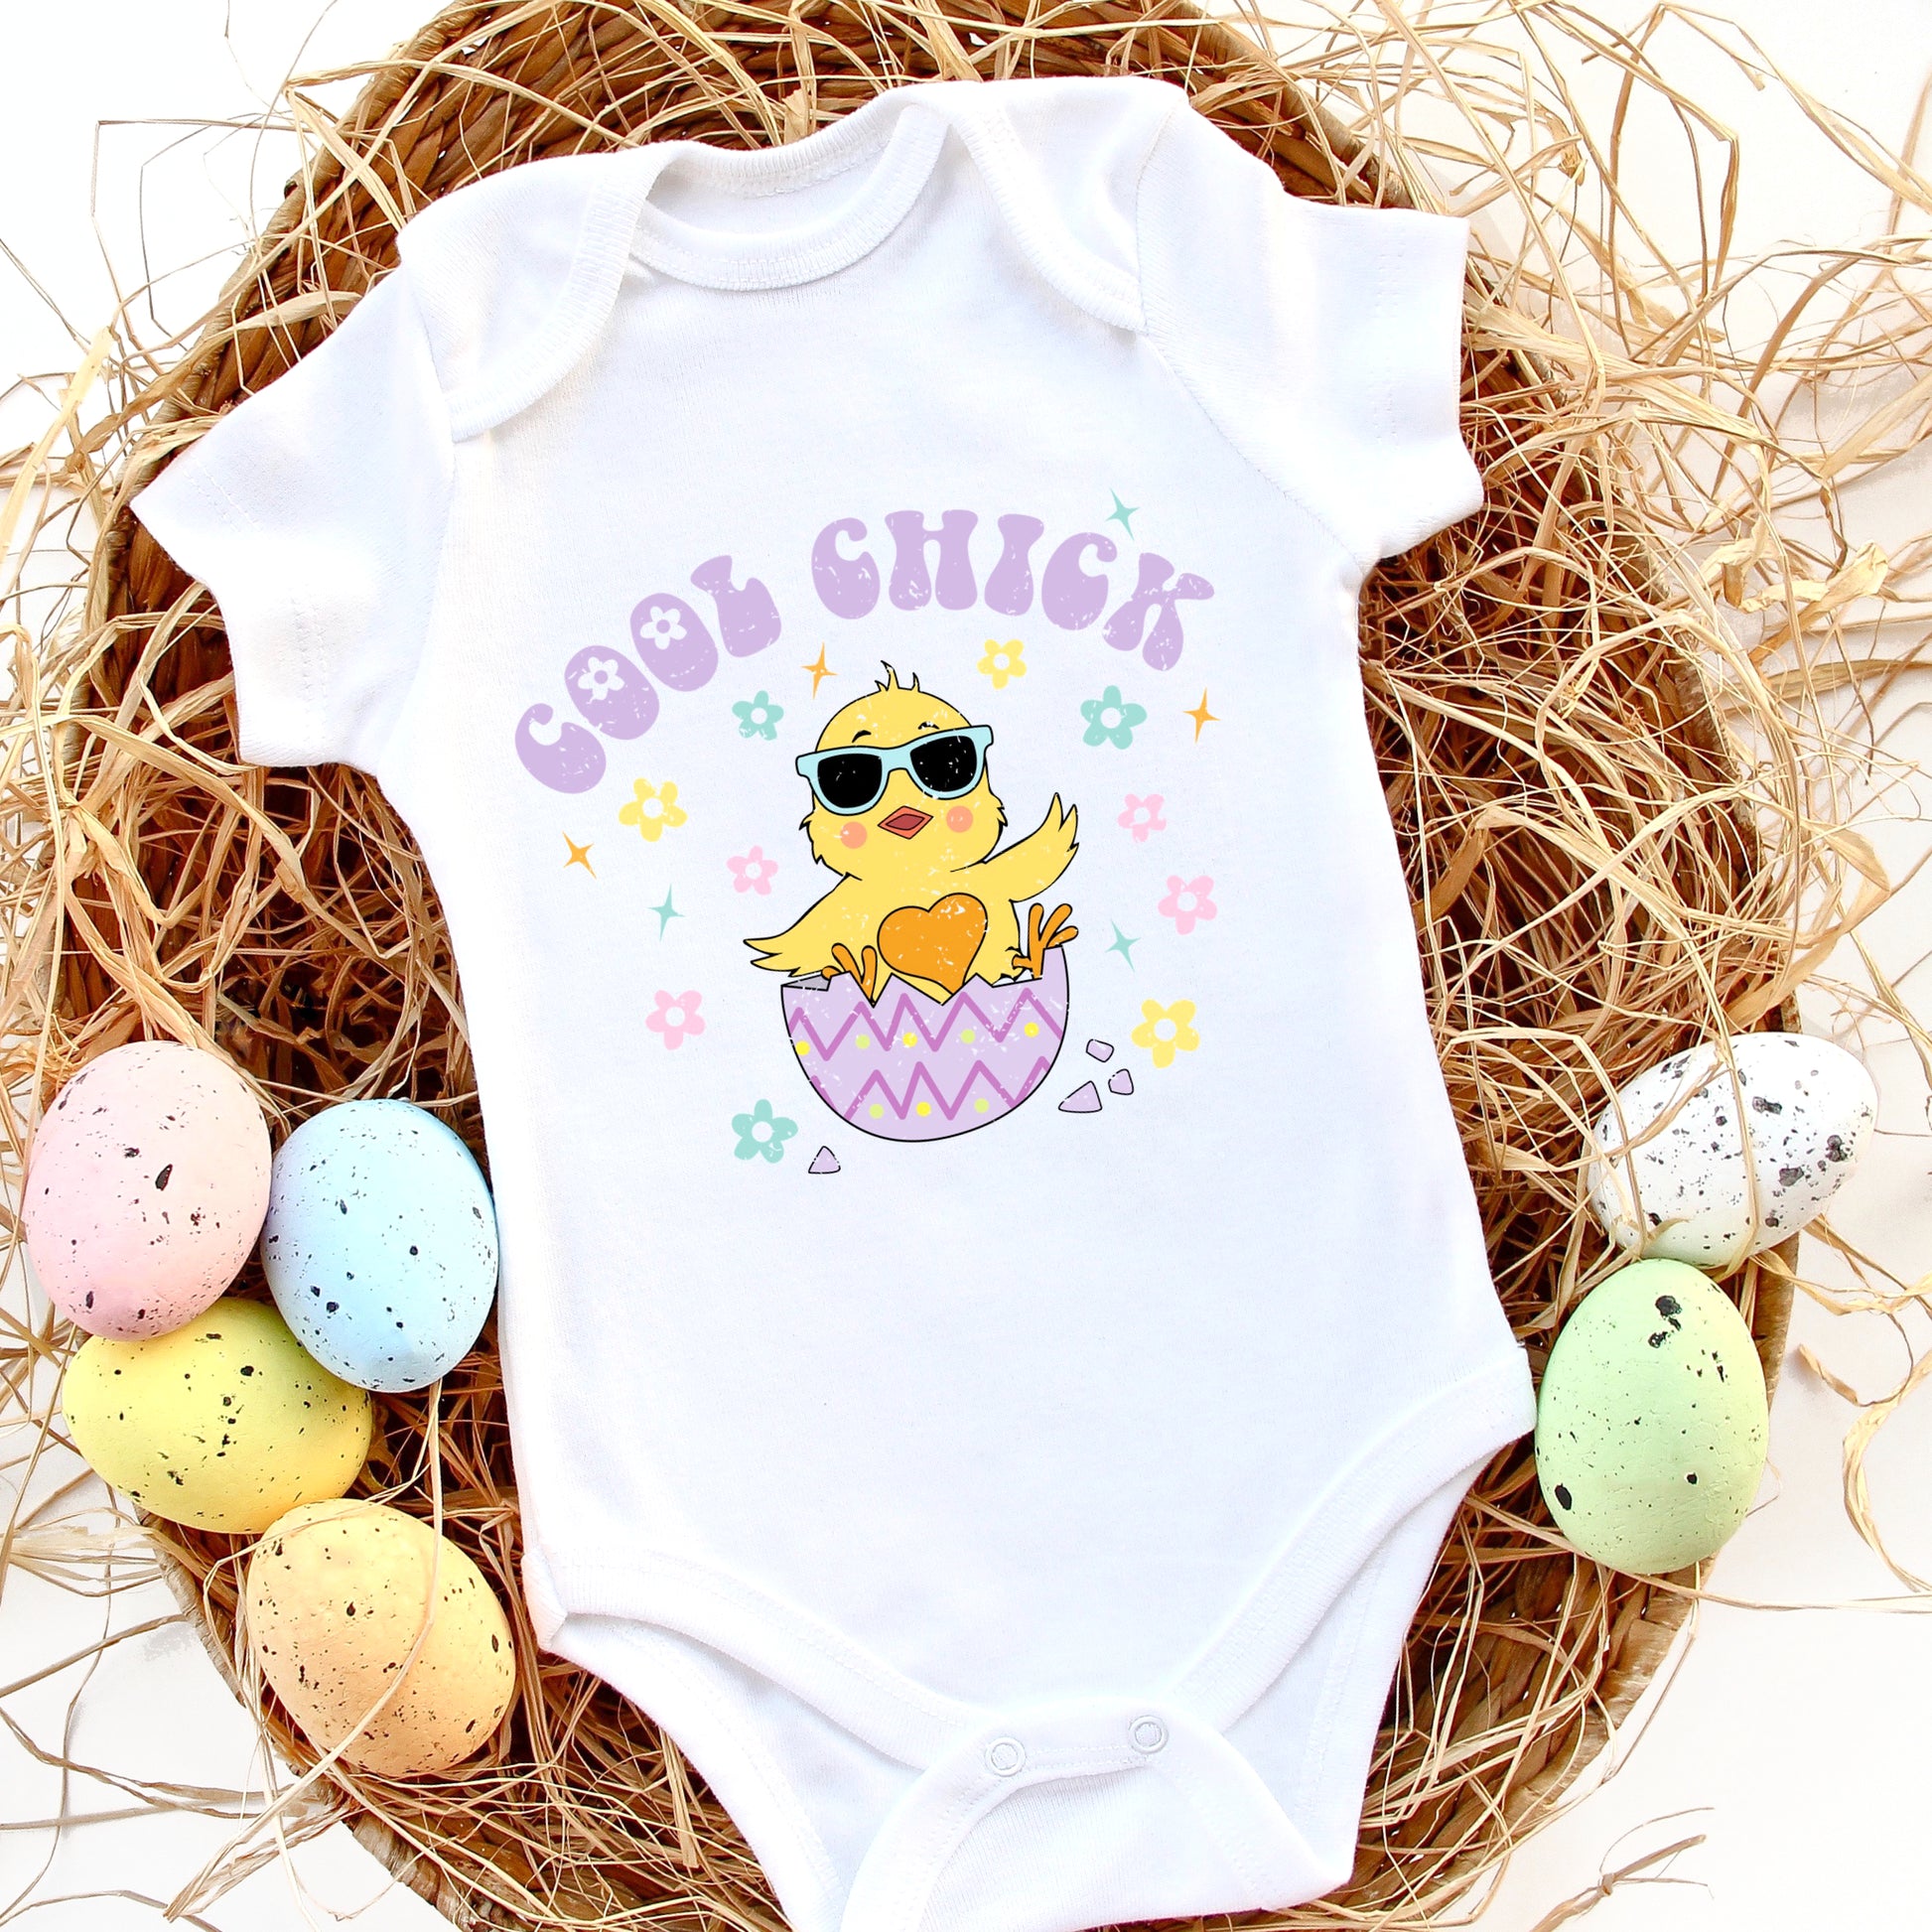 Easter Egg and Chicken transfer with the words "Cool Chick" - Lavender and Yellow Easter Egg with baby Chick - Iron on Transfer DTF Sublimation 